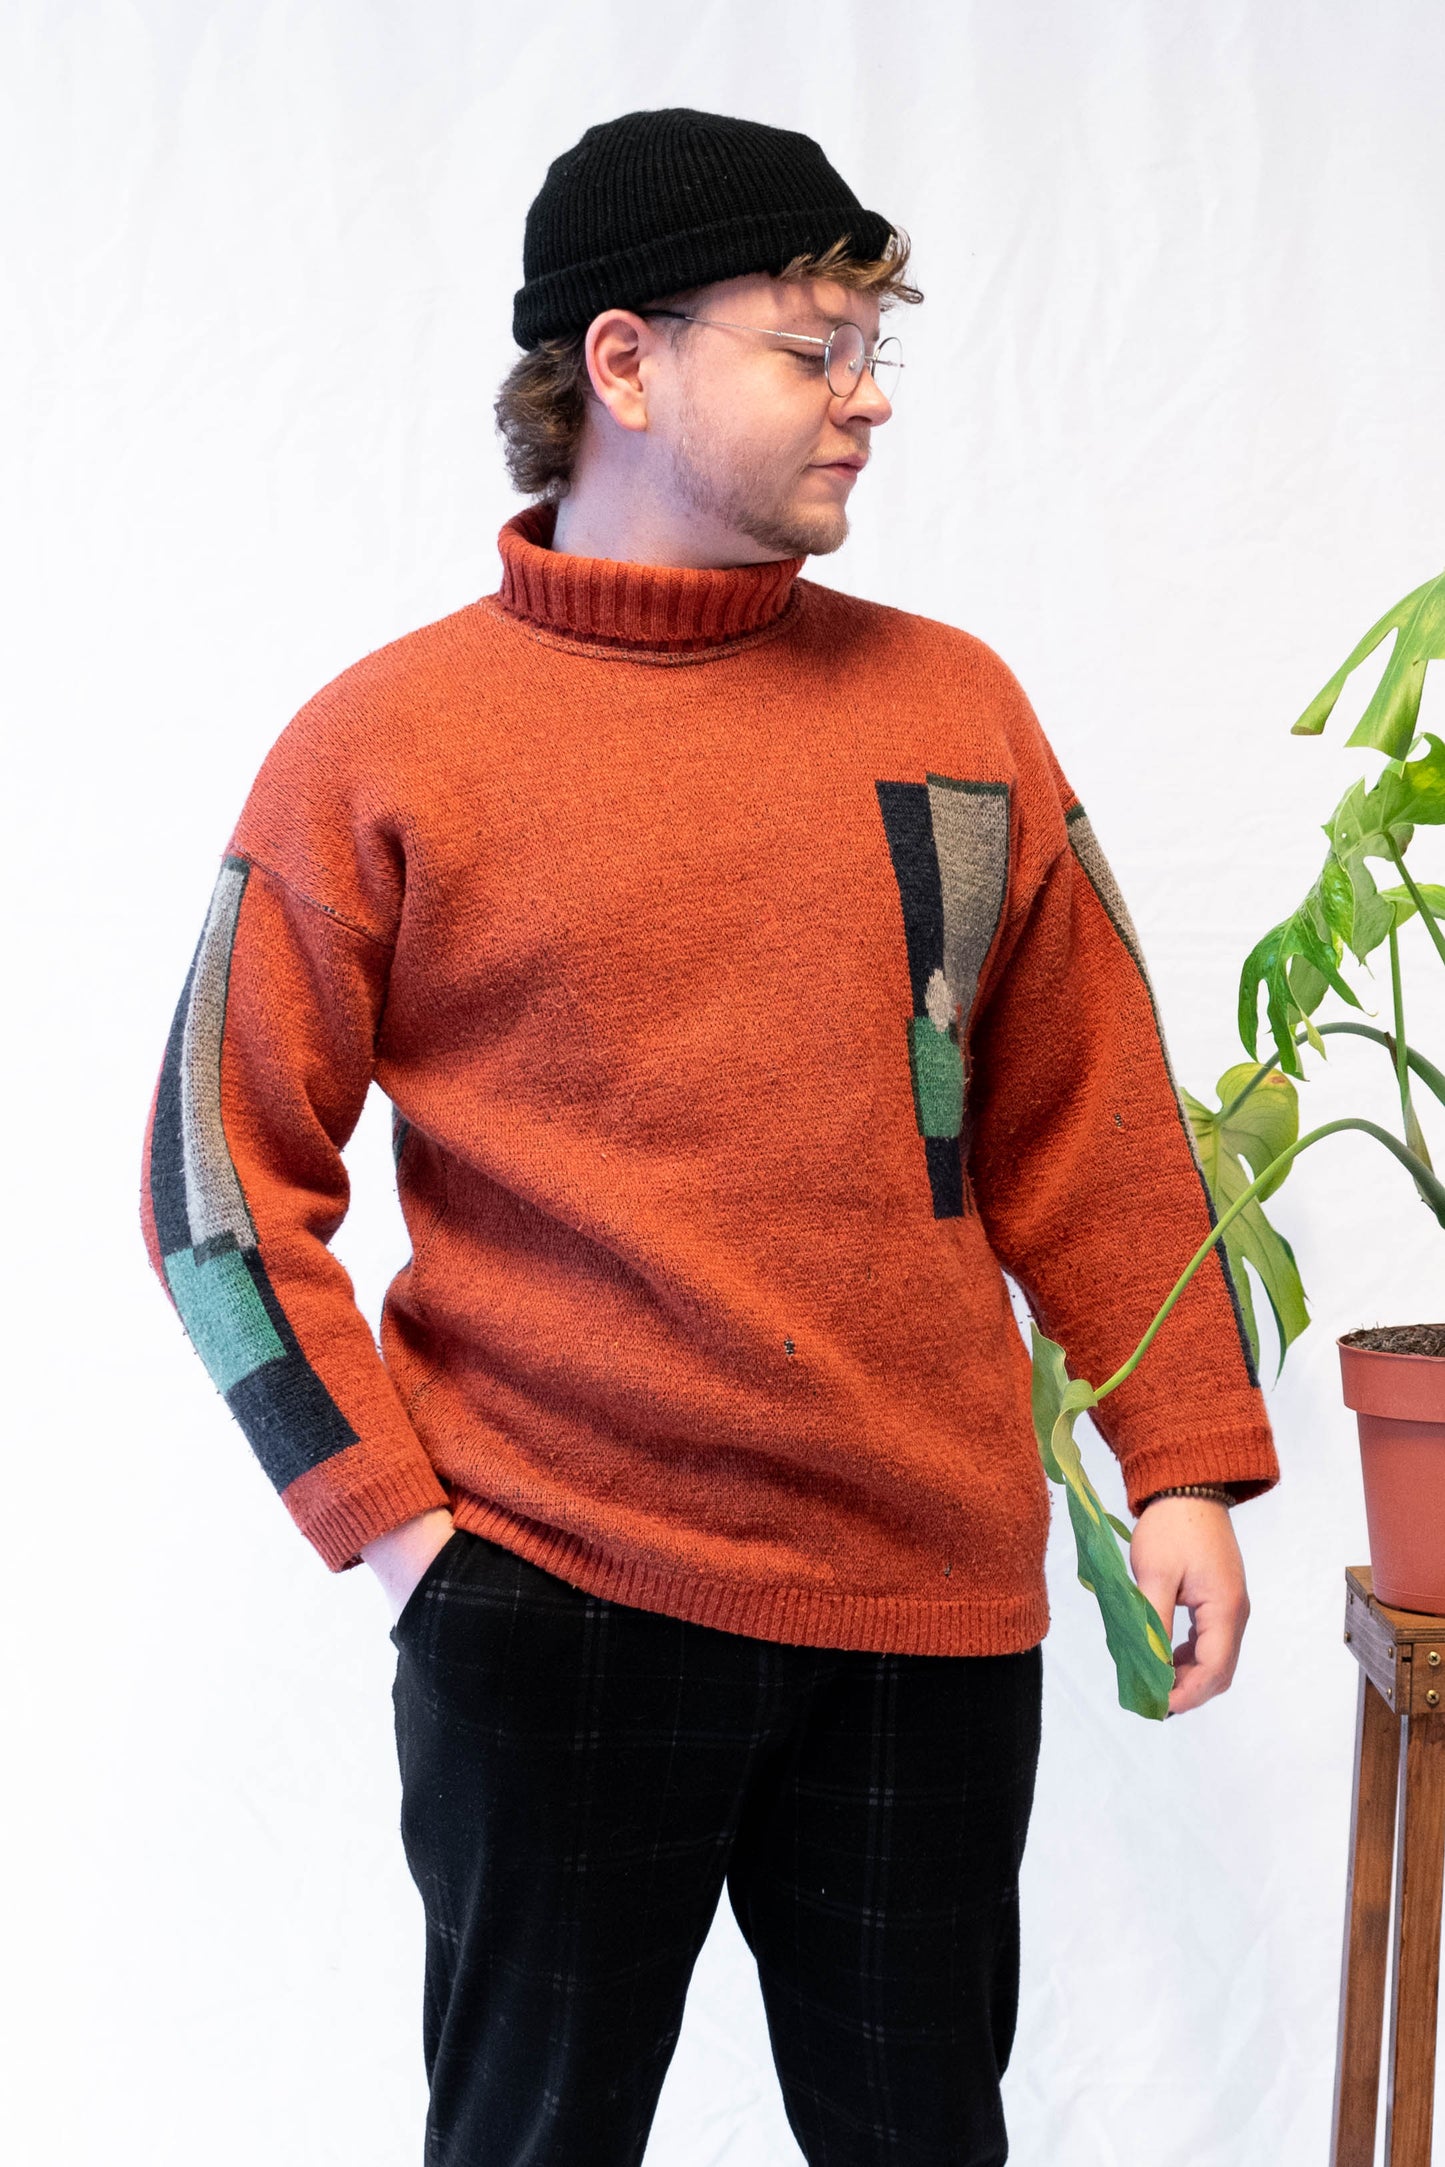 NEW IN! Oxbow sweater